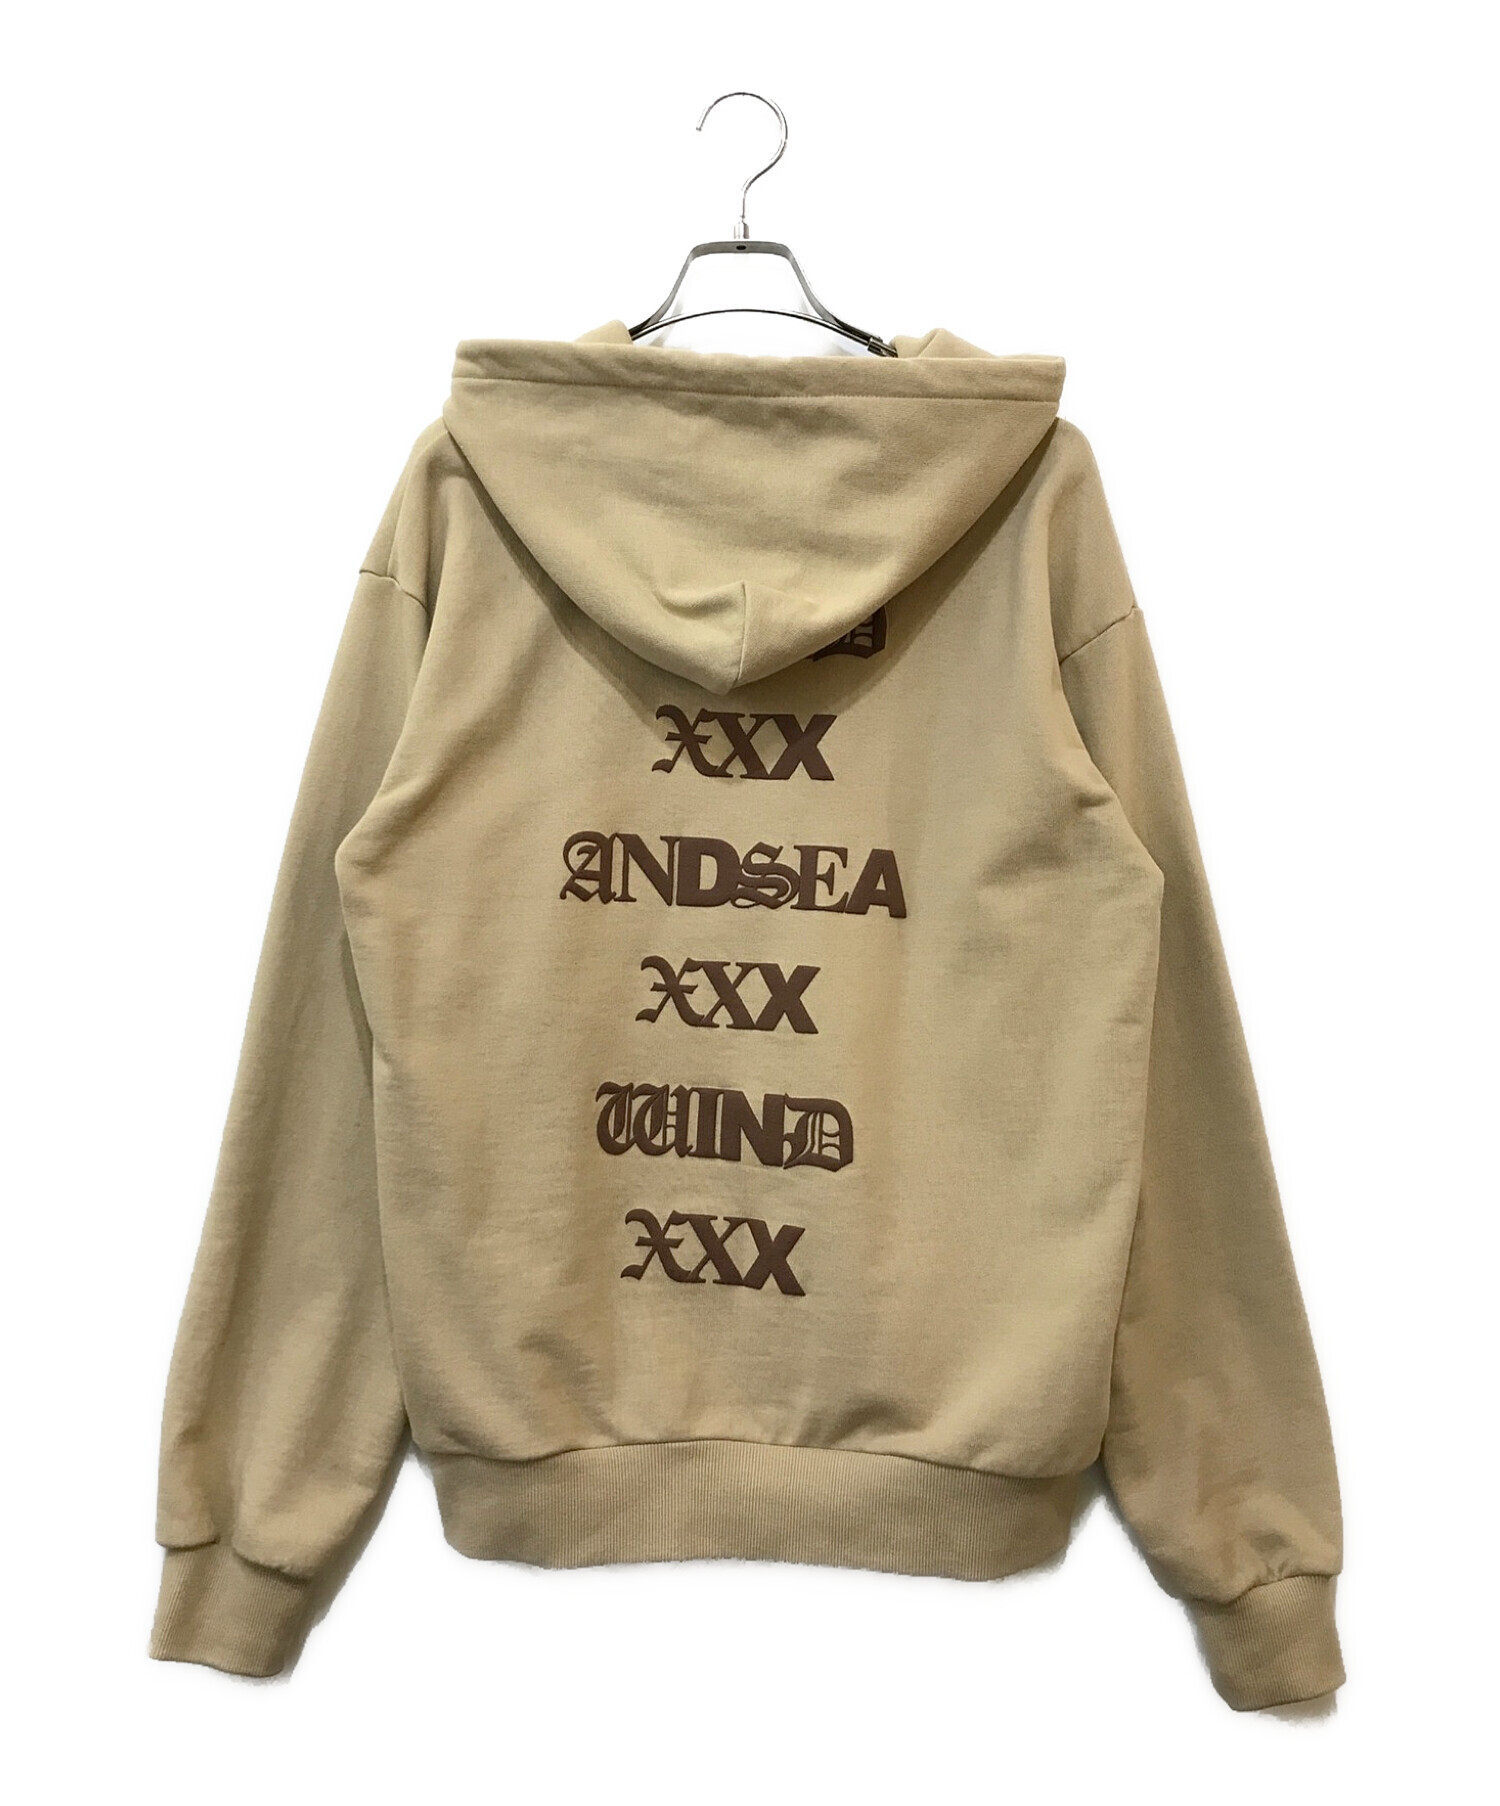 GOD SELECTION XXX WIND AND SEA HOODIE